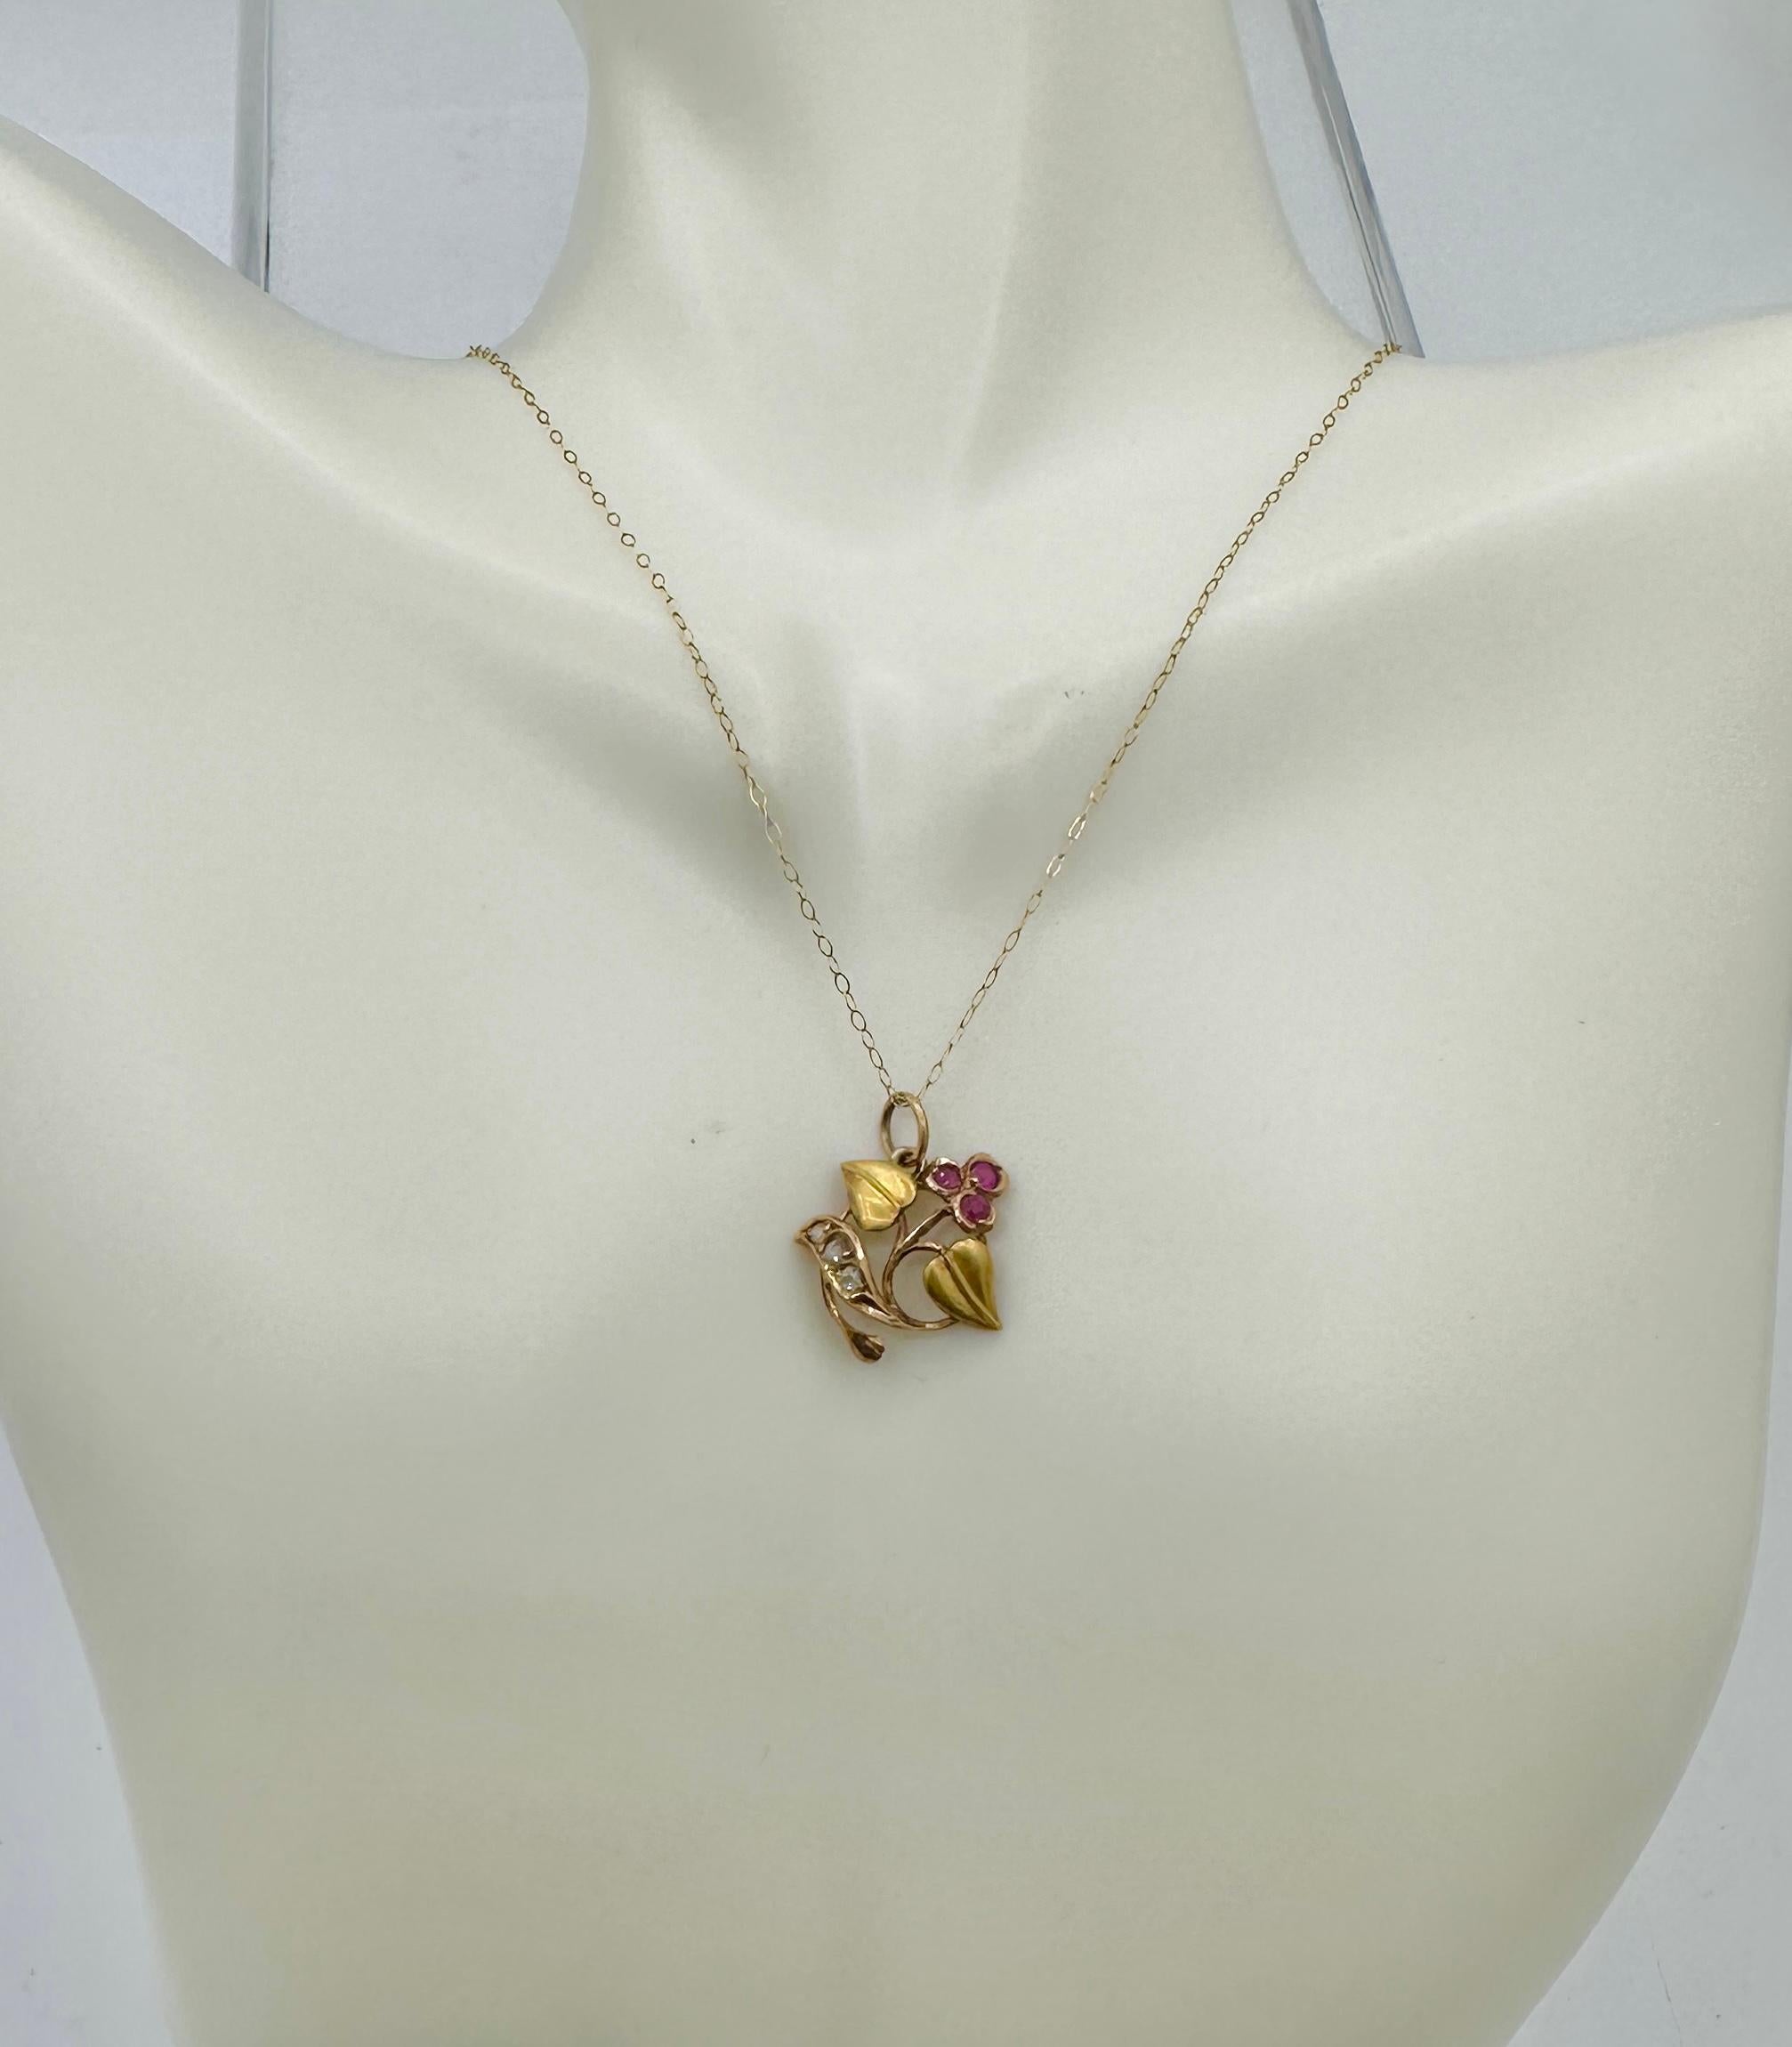 Art Nouveau Ruby Rose Cut Diamond Flower Pendant Necklace Charm 18 Karat Gold In Excellent Condition For Sale In New York, NY